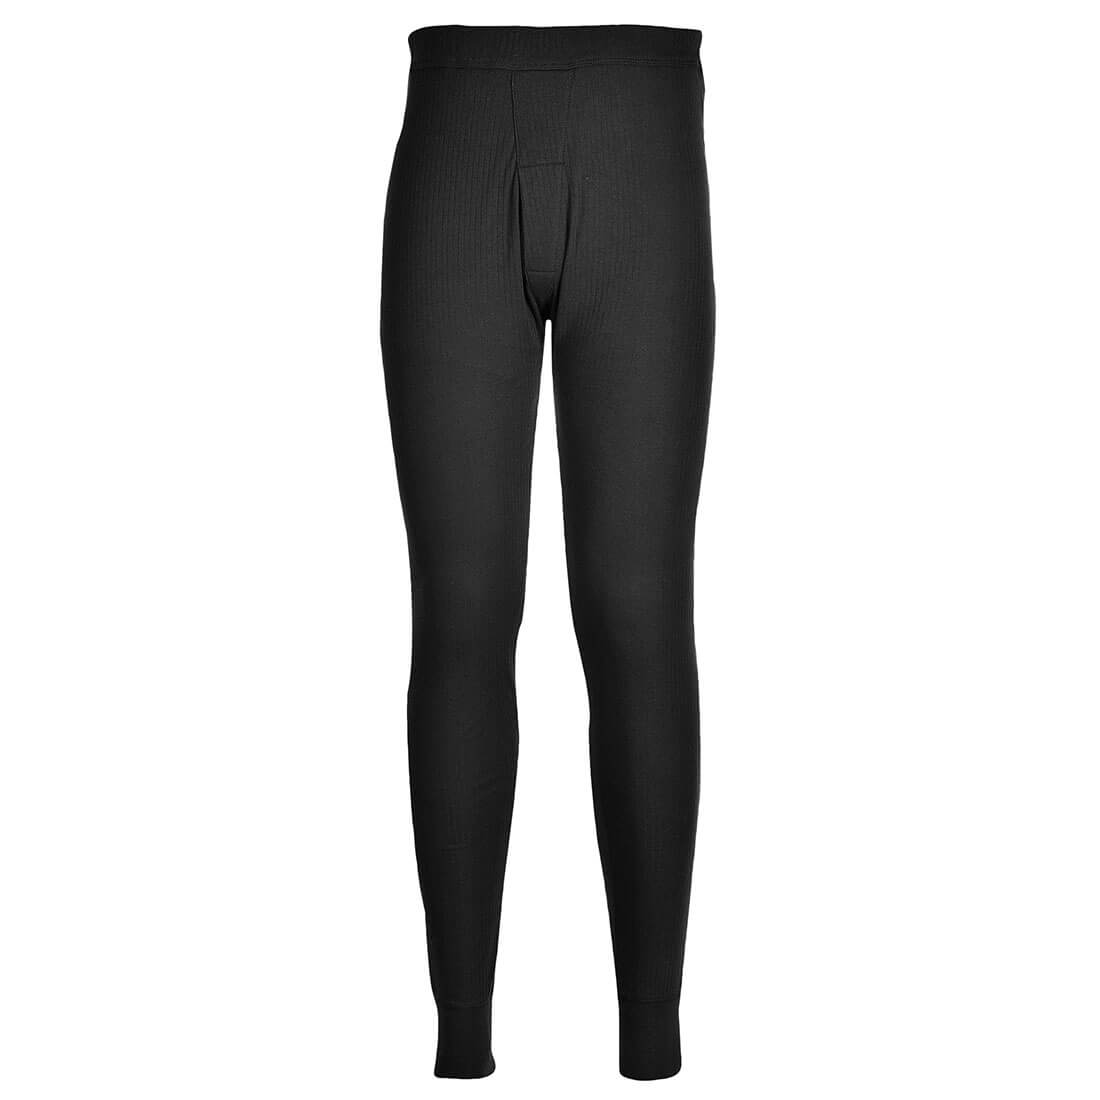 Thermal Trouser - Safetywear